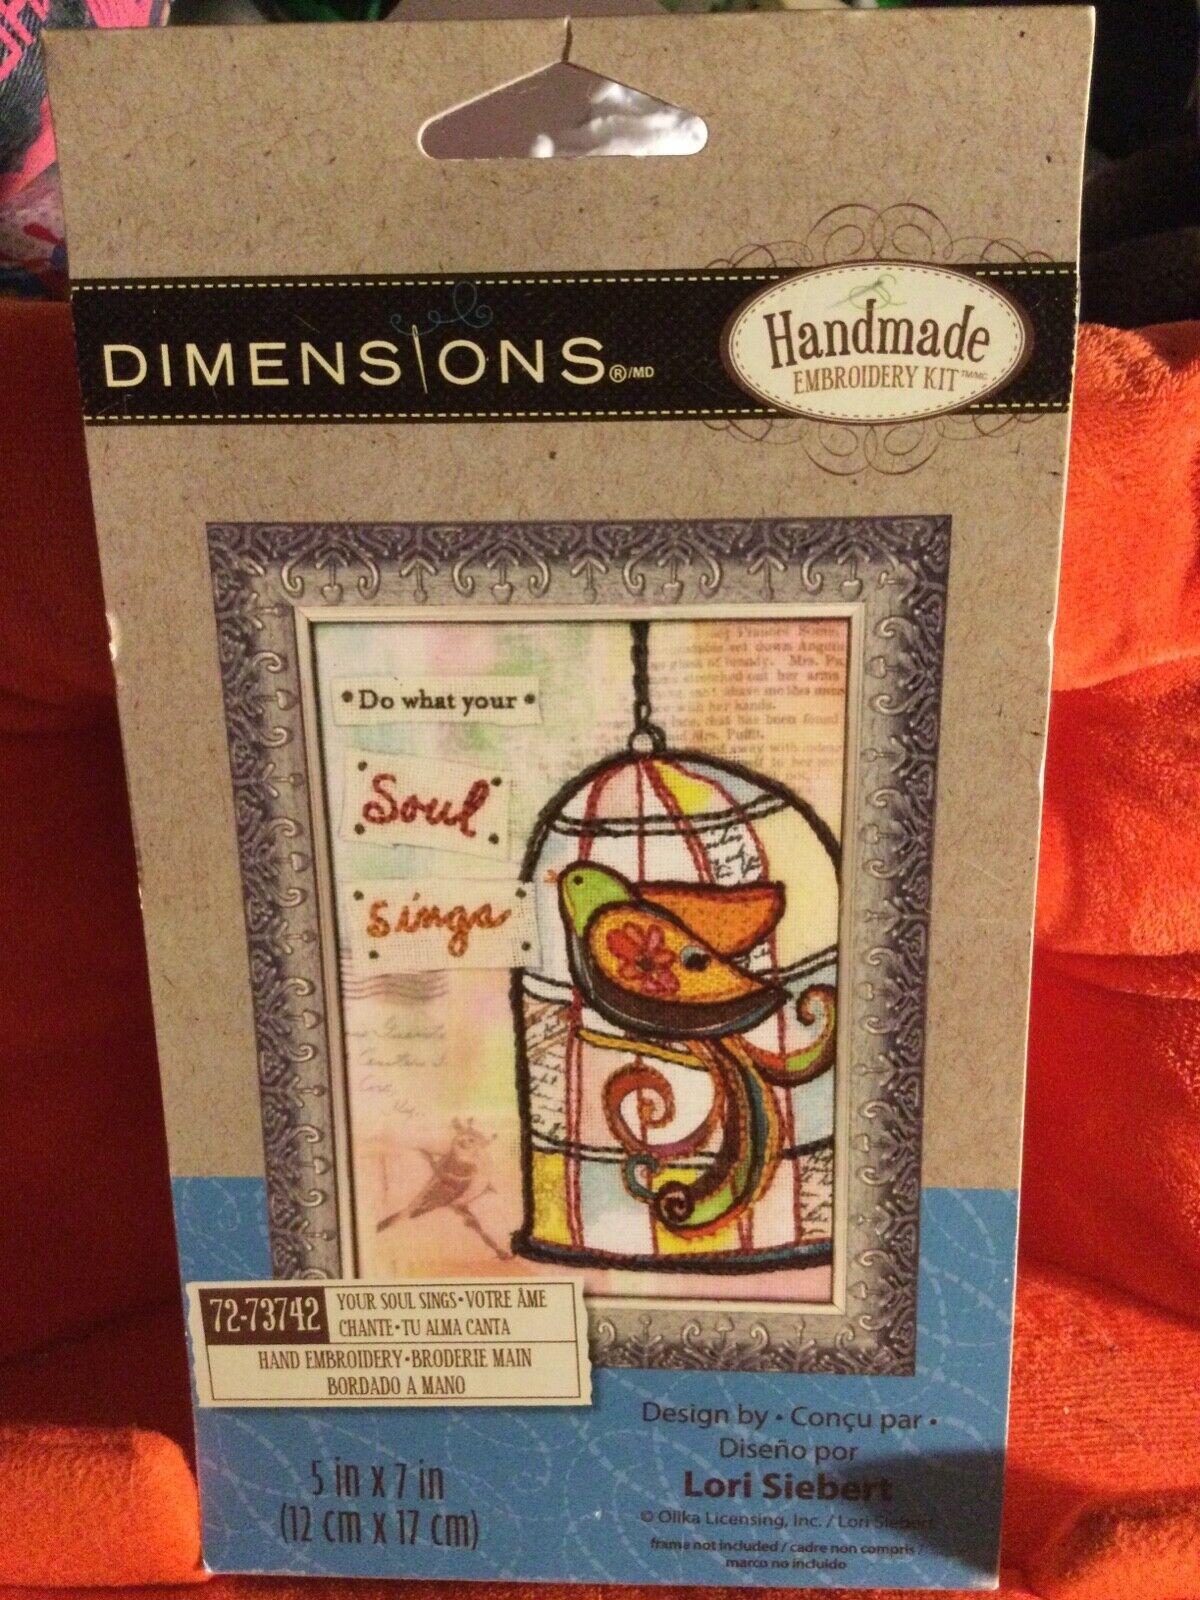 Dimensions Handmade Embroidery Kit, "do What Your Soul Sings"